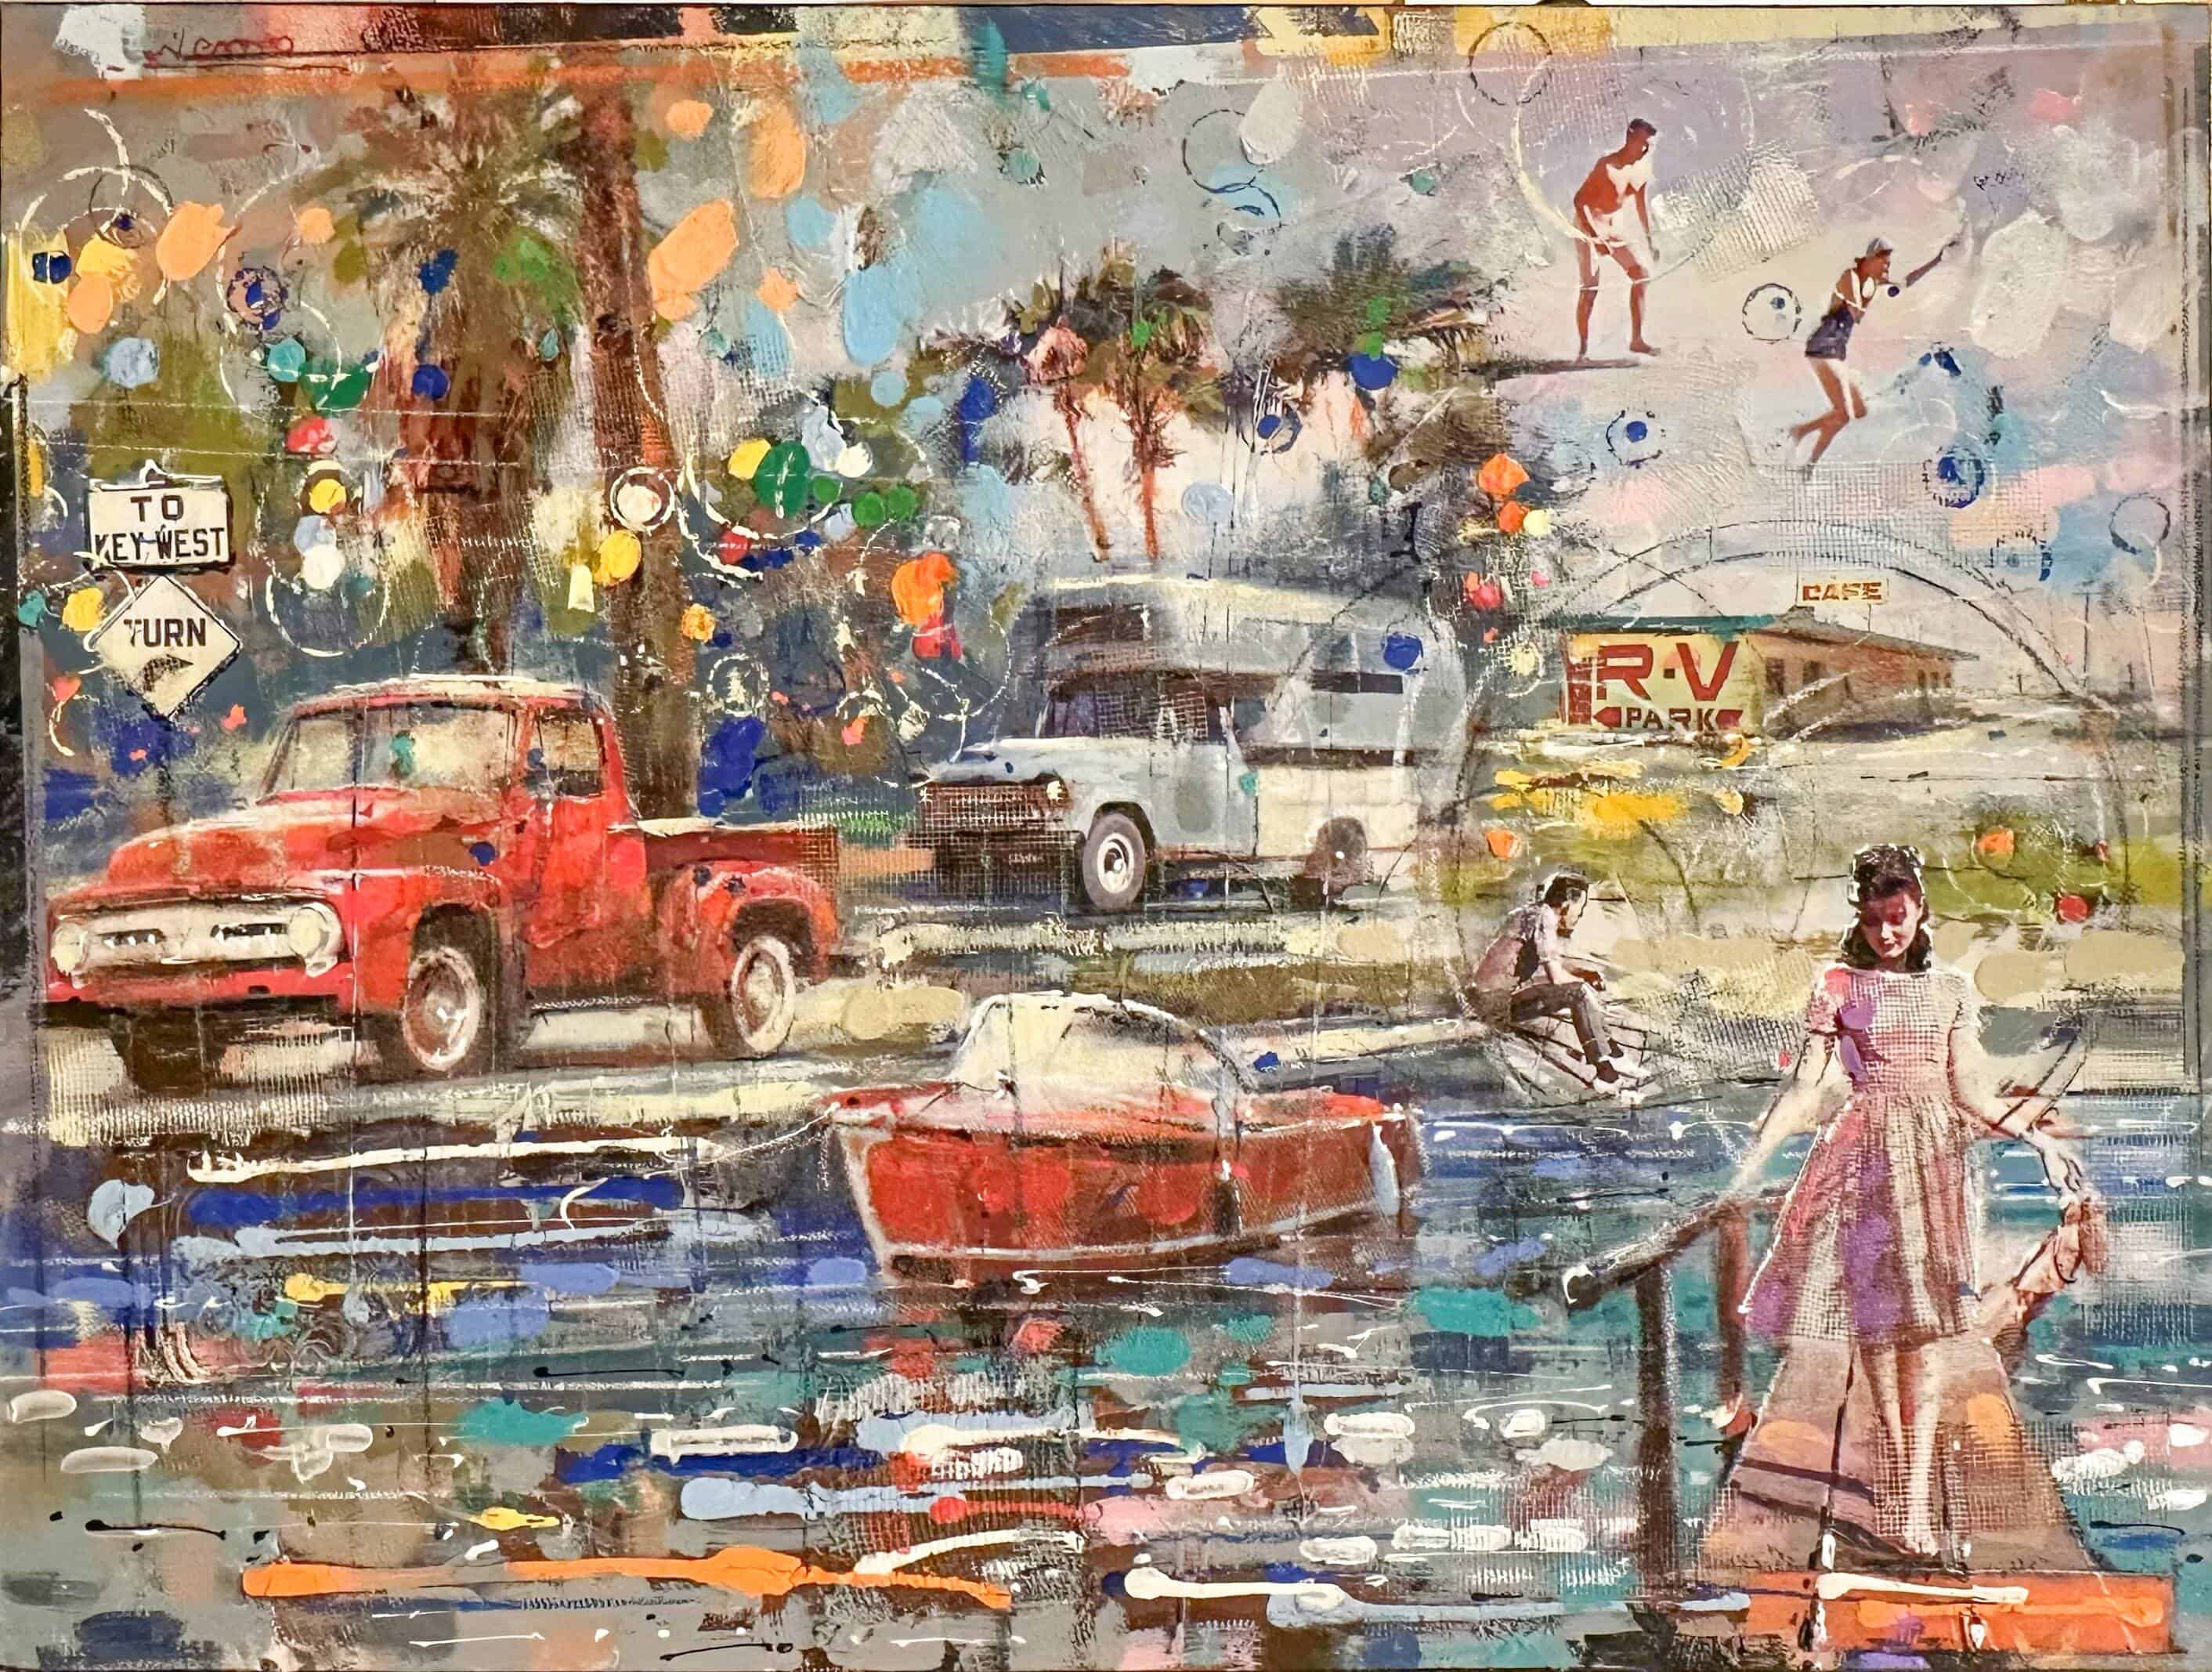 Contemporary art. Title: To Key West Turn, 30 x 40 inches, Mixed Media on canvas by Canadian artist Victor Nemo.